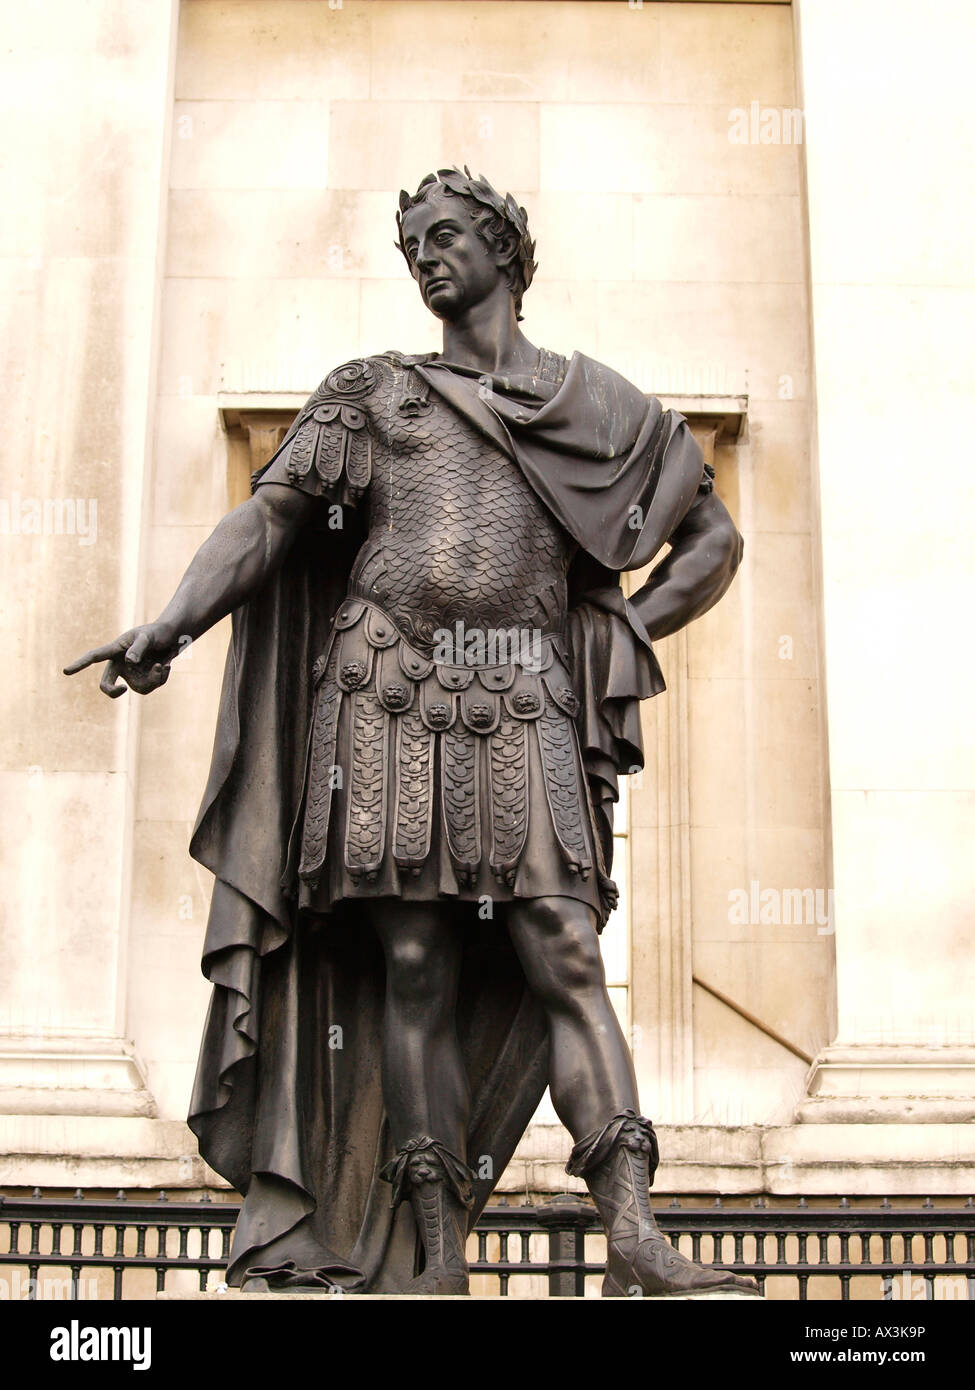 Statue of James II, in Imperial Roman dress as Julius Cesar, by Gibbons Grinling outside the National Gallery London England Stock Photo